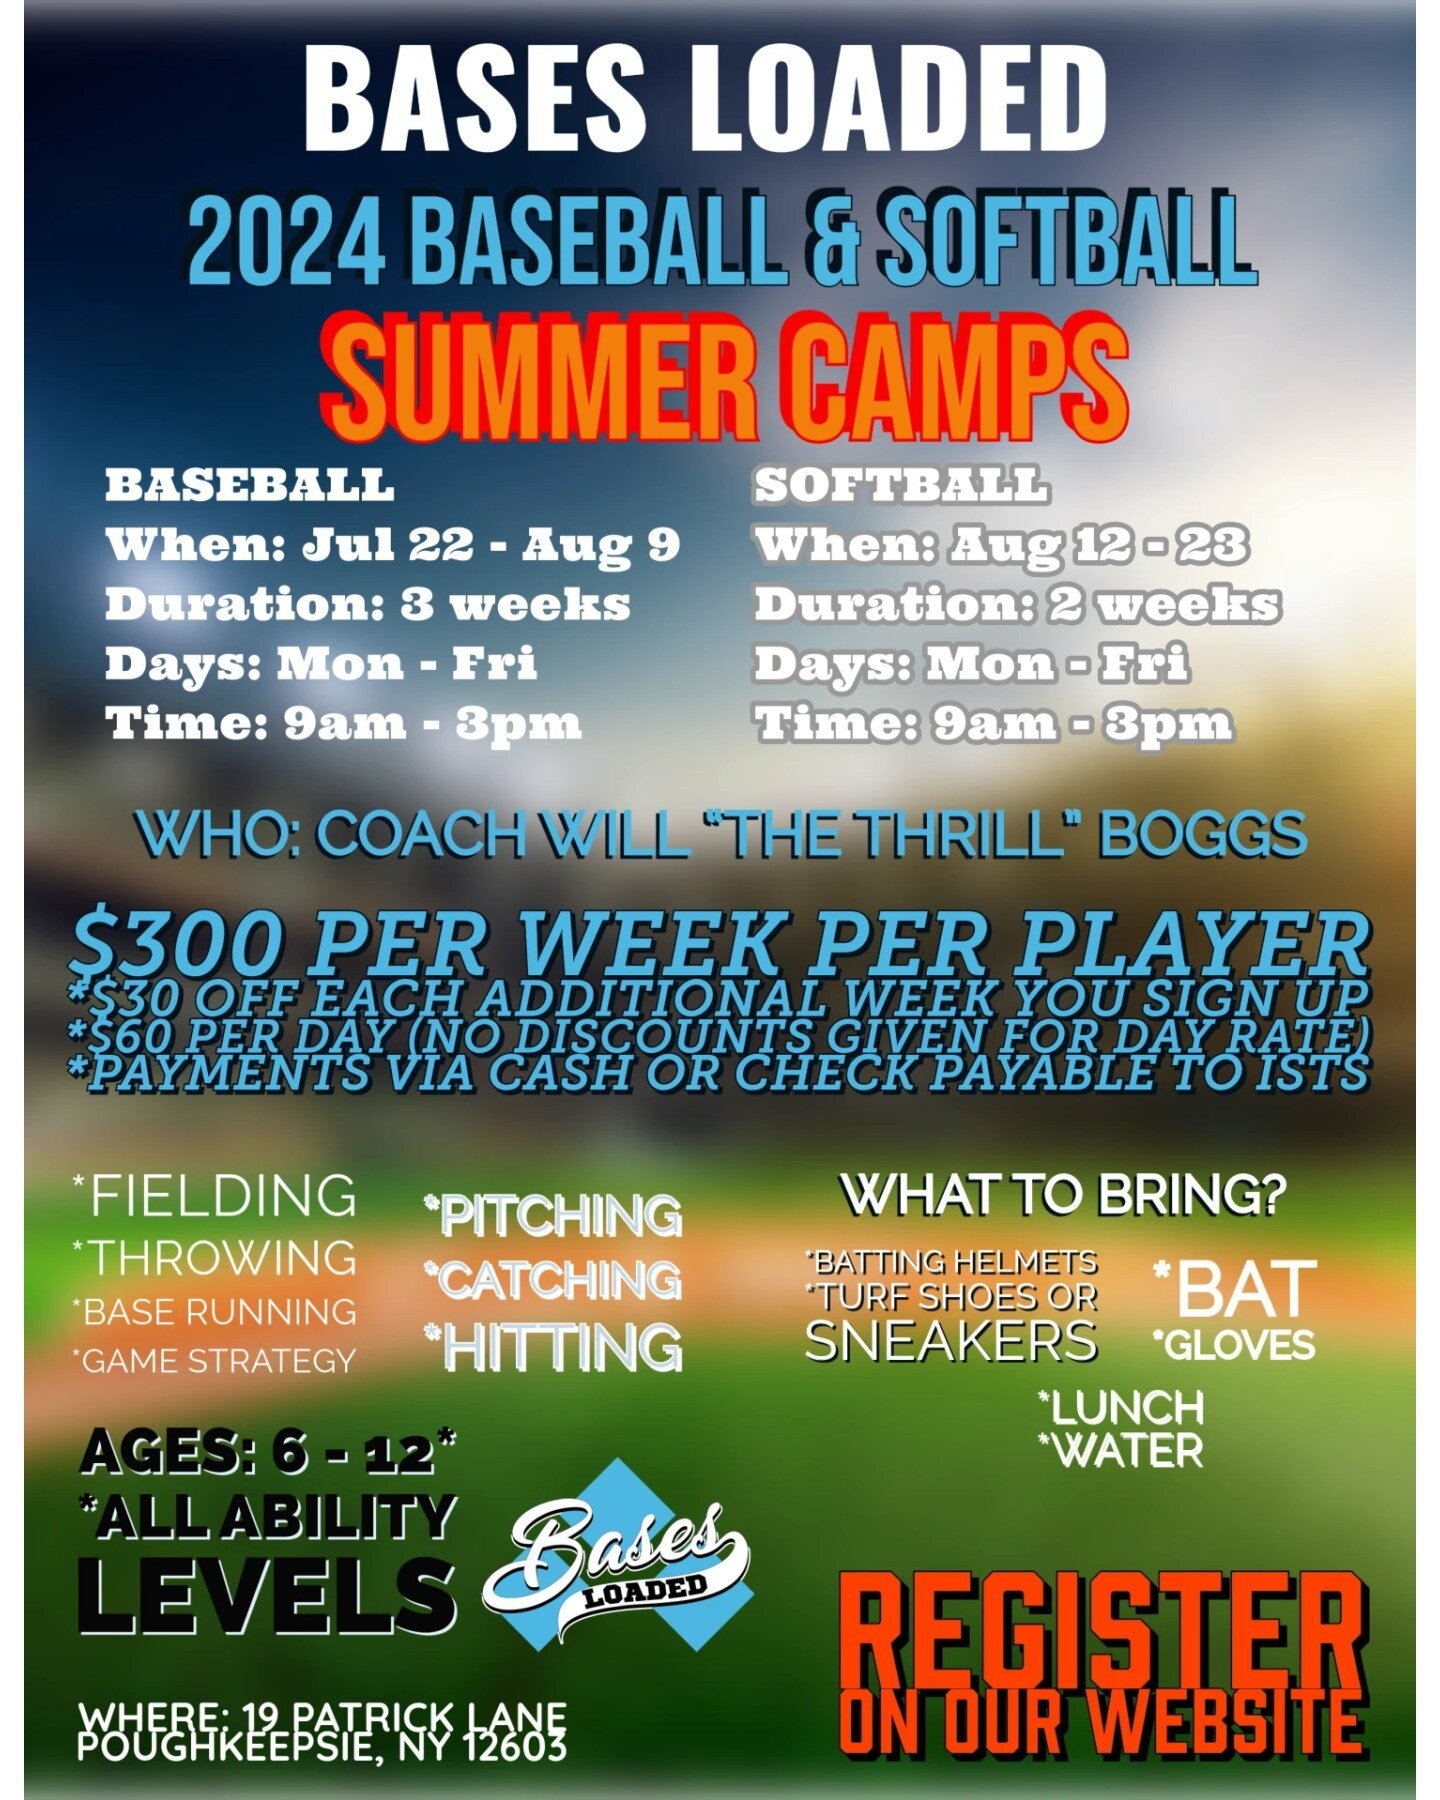 Summer Camp @ Bases Loaded.

Baseball: July 23 - August 9
Softball: August 12 - August 23

All Skill Levels: Ages 6 - 12

Unleash Your Potential on the Field. Are you ready to take your baseball skills to the next level? Look no further!

Bases Loade